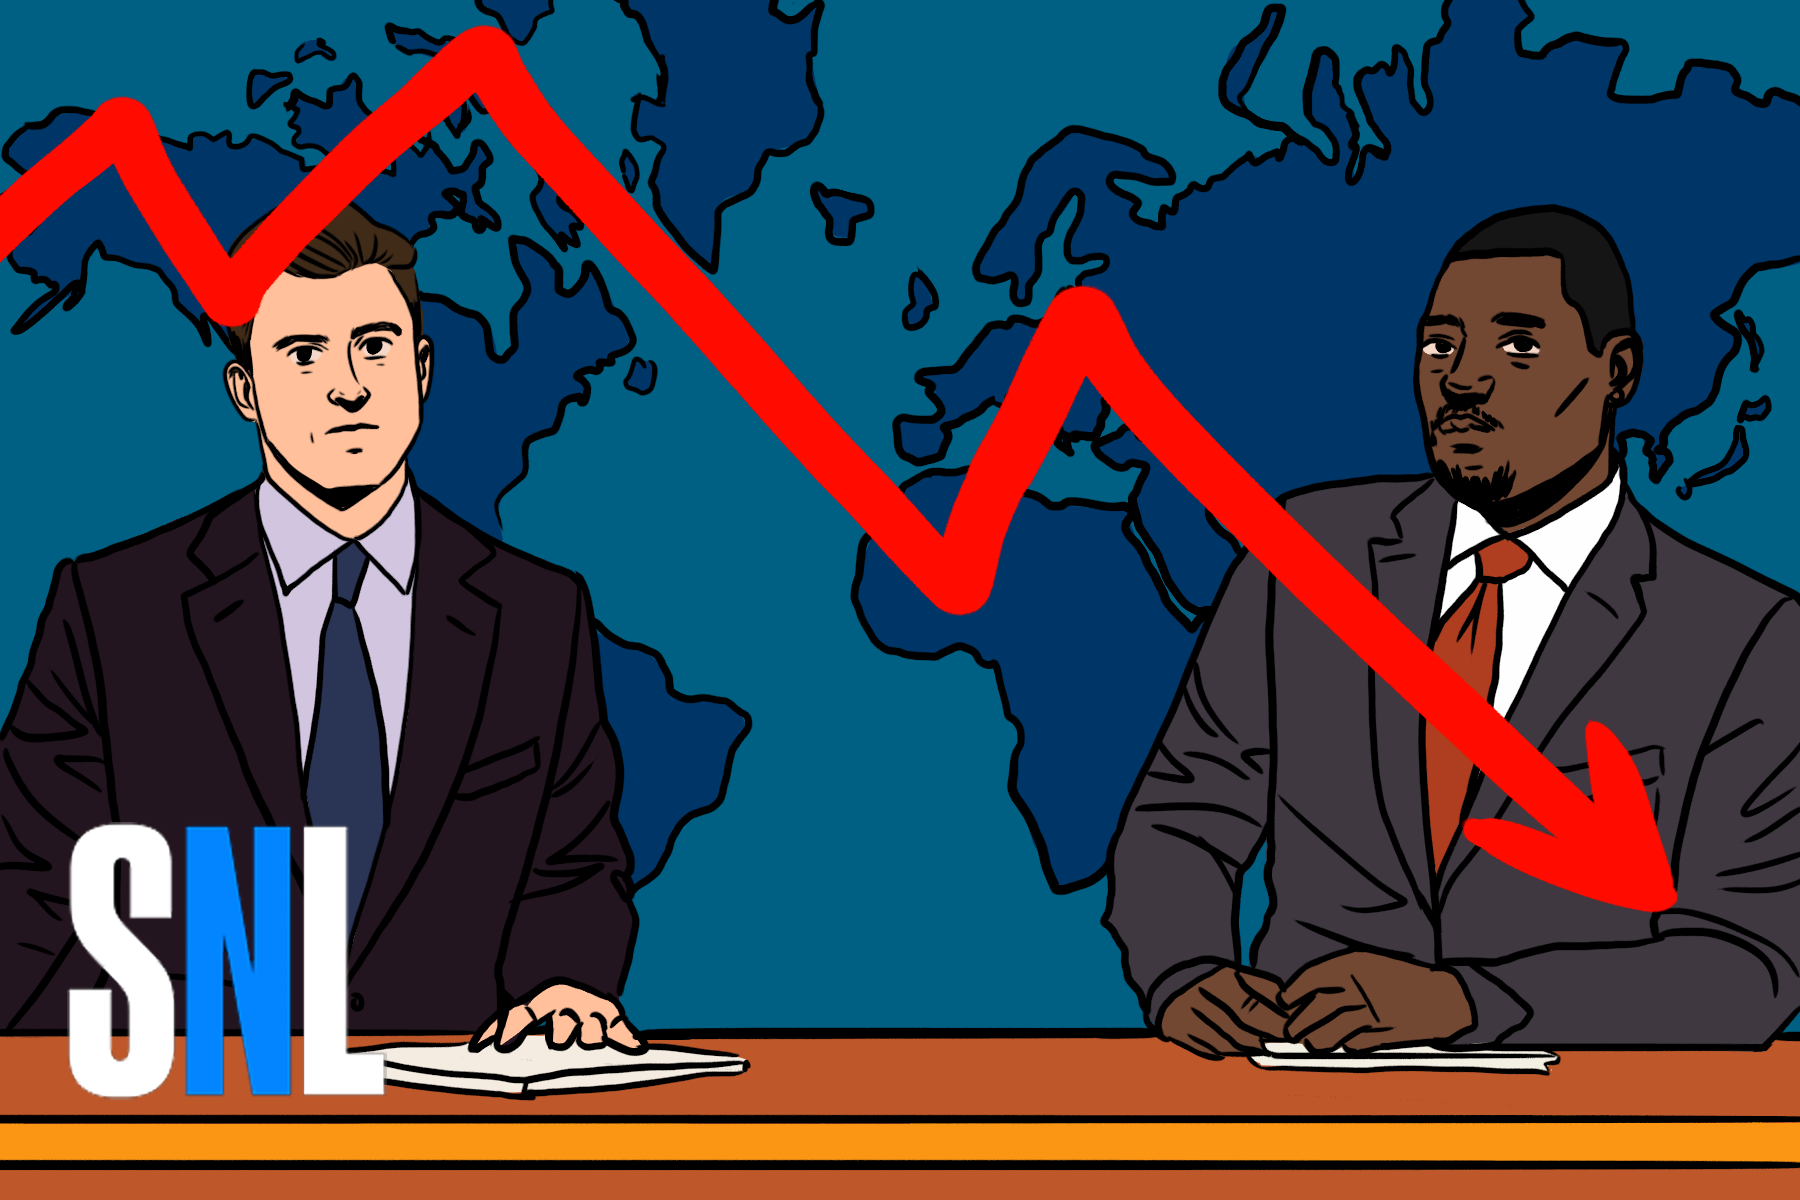 in an article about SNL, illustration of Michael Che and Colin Jost doing weekend update with a downward arrow superimposed